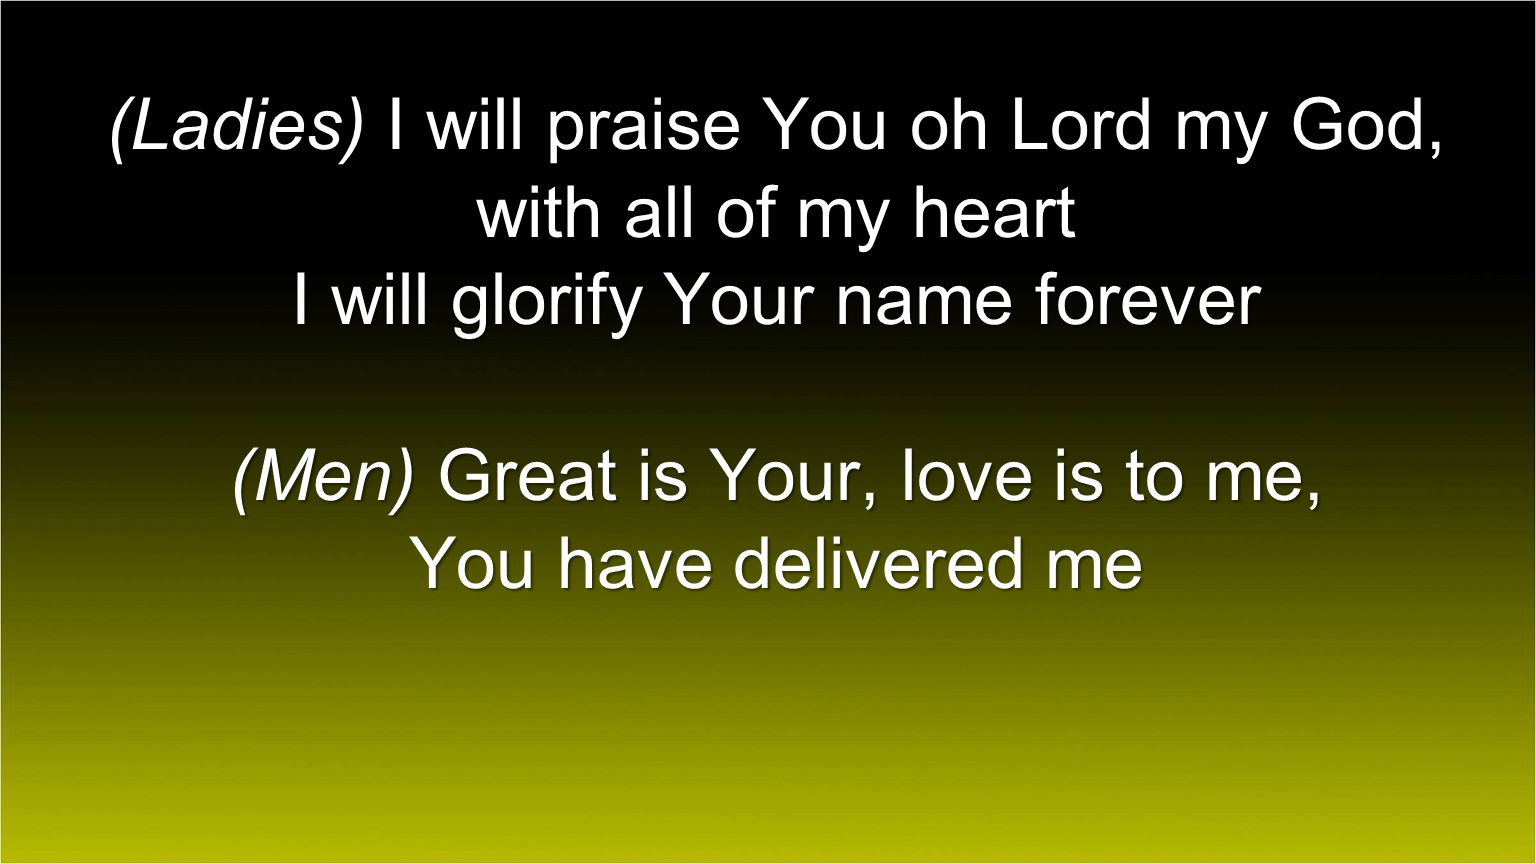 (Ladies) I will praise You oh Lord my God, with all of my heart